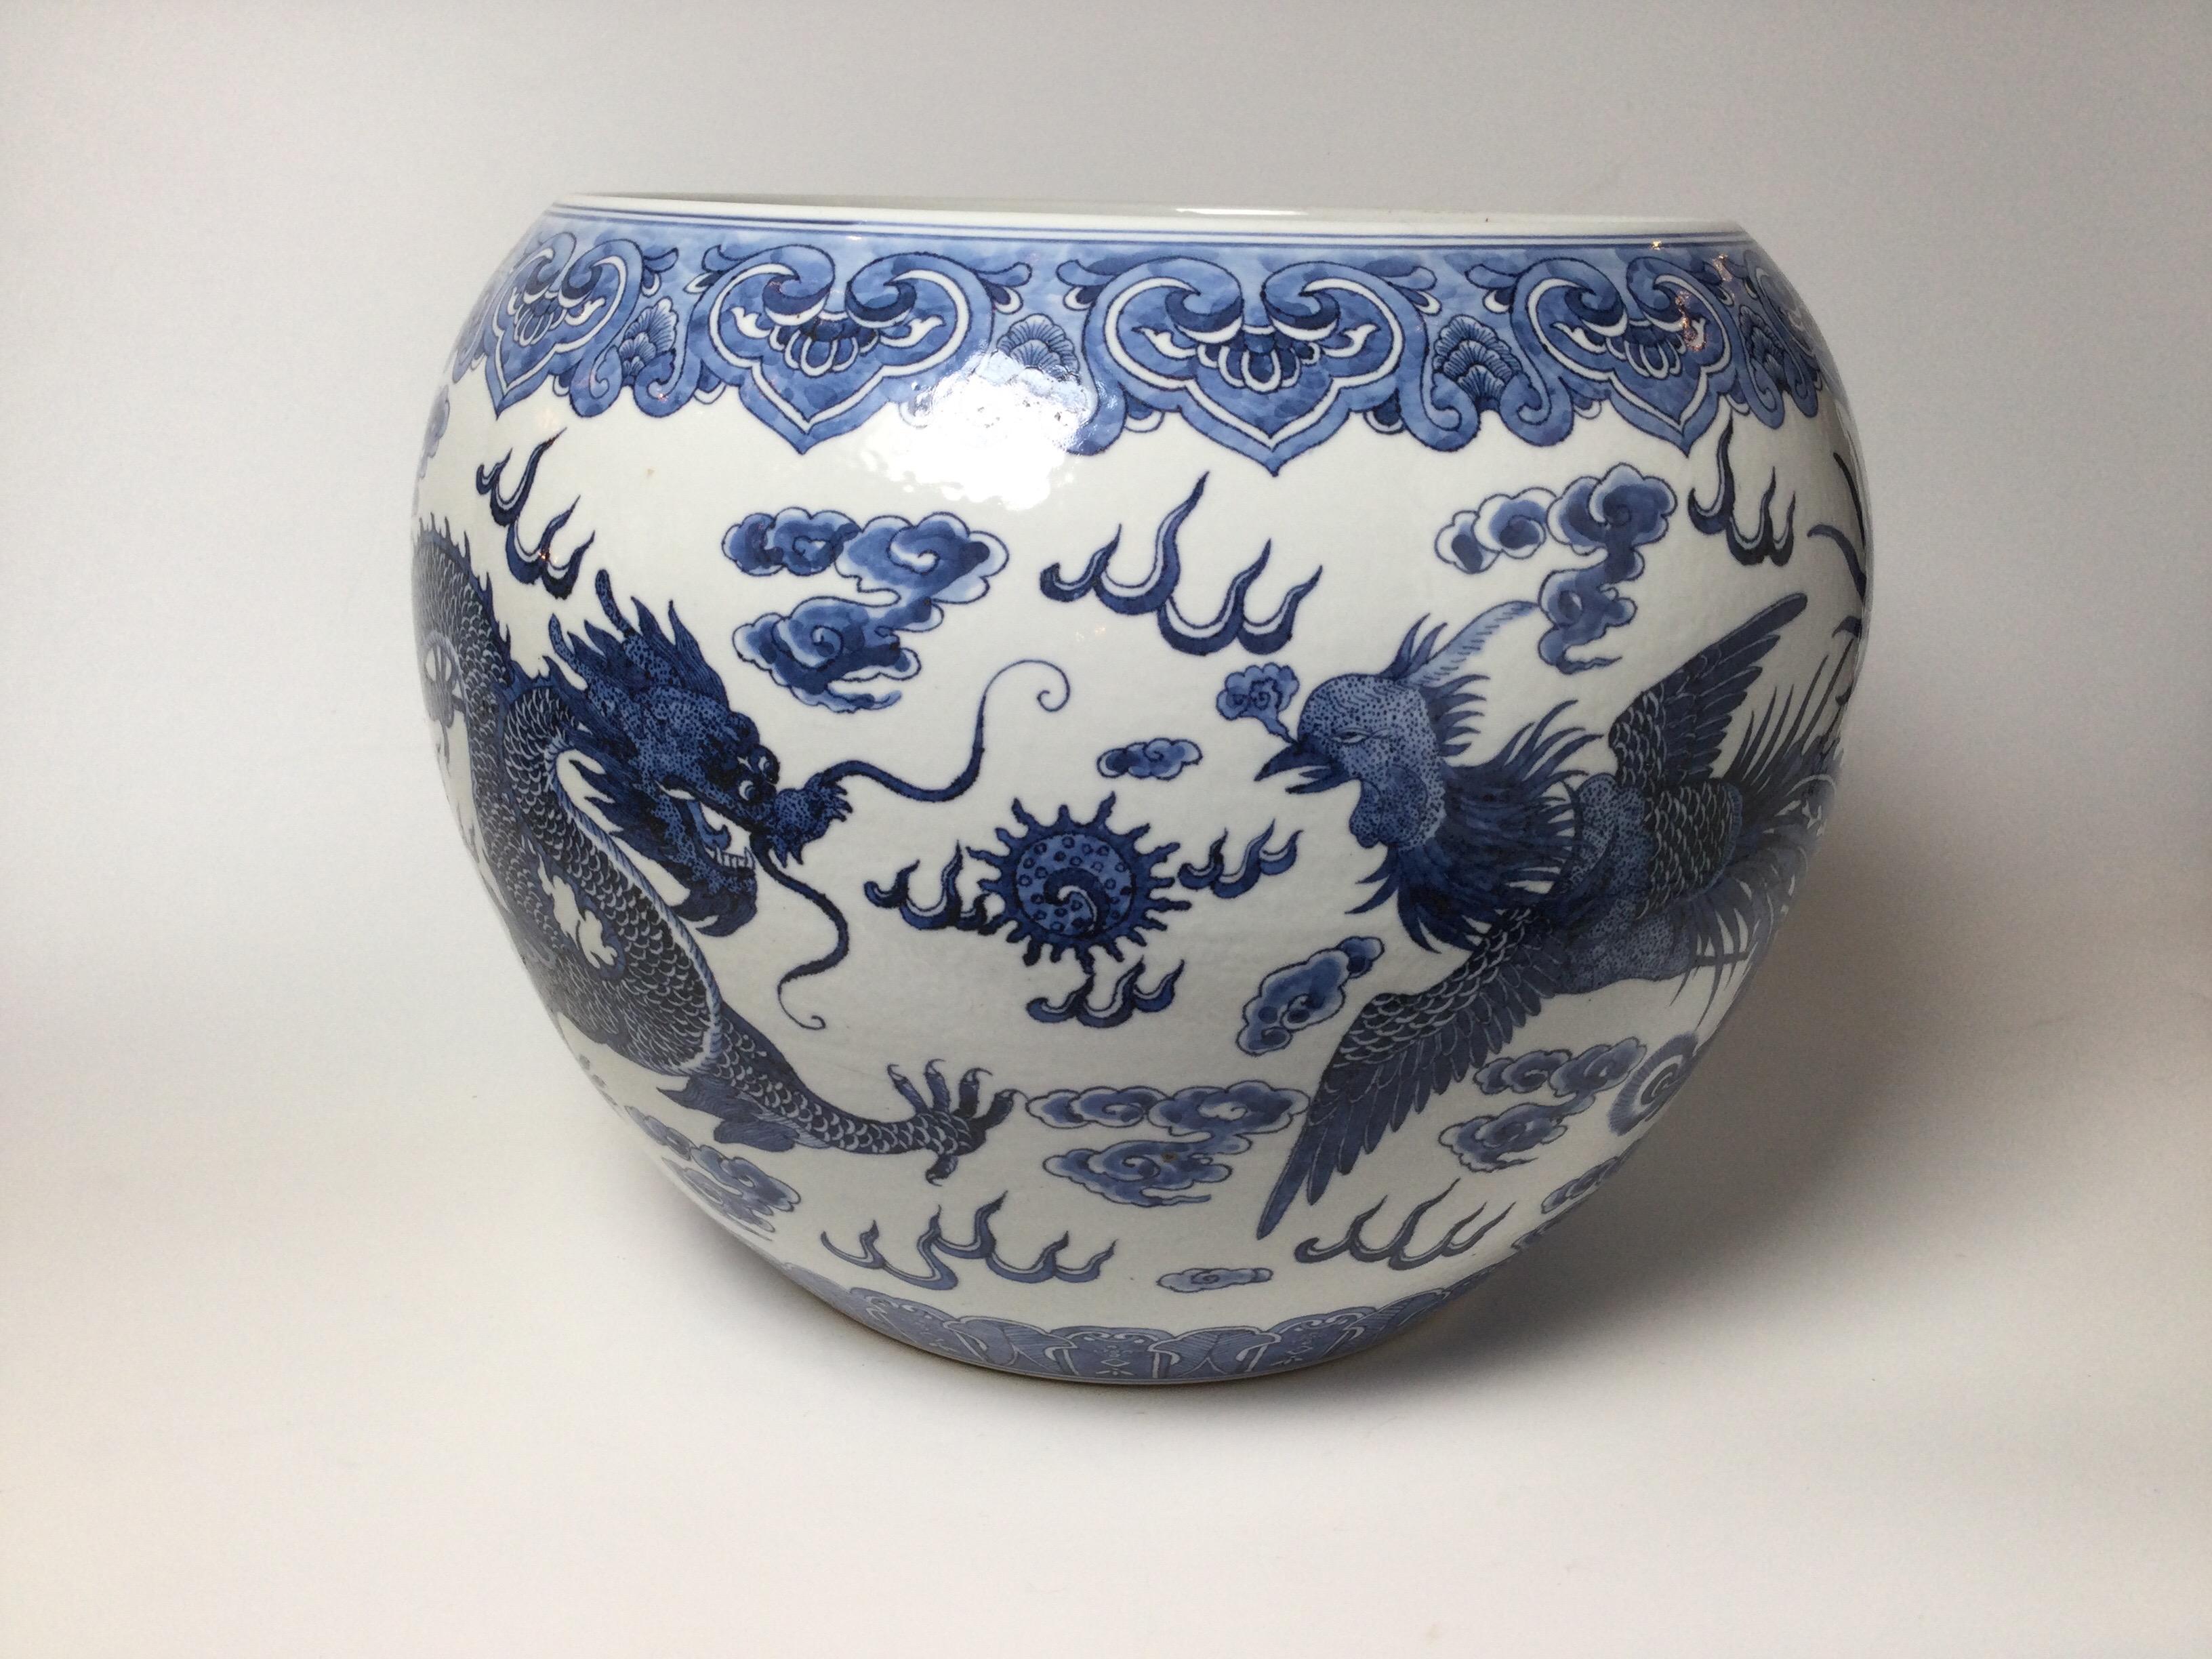 Classic Chinese blue and white porcelain jardinière with hand painted cobalt decoration. The white porcelain with painted Dragon and Phoenix bird decoration. Measures: 14.5 inches diameter, 12 inches tall.